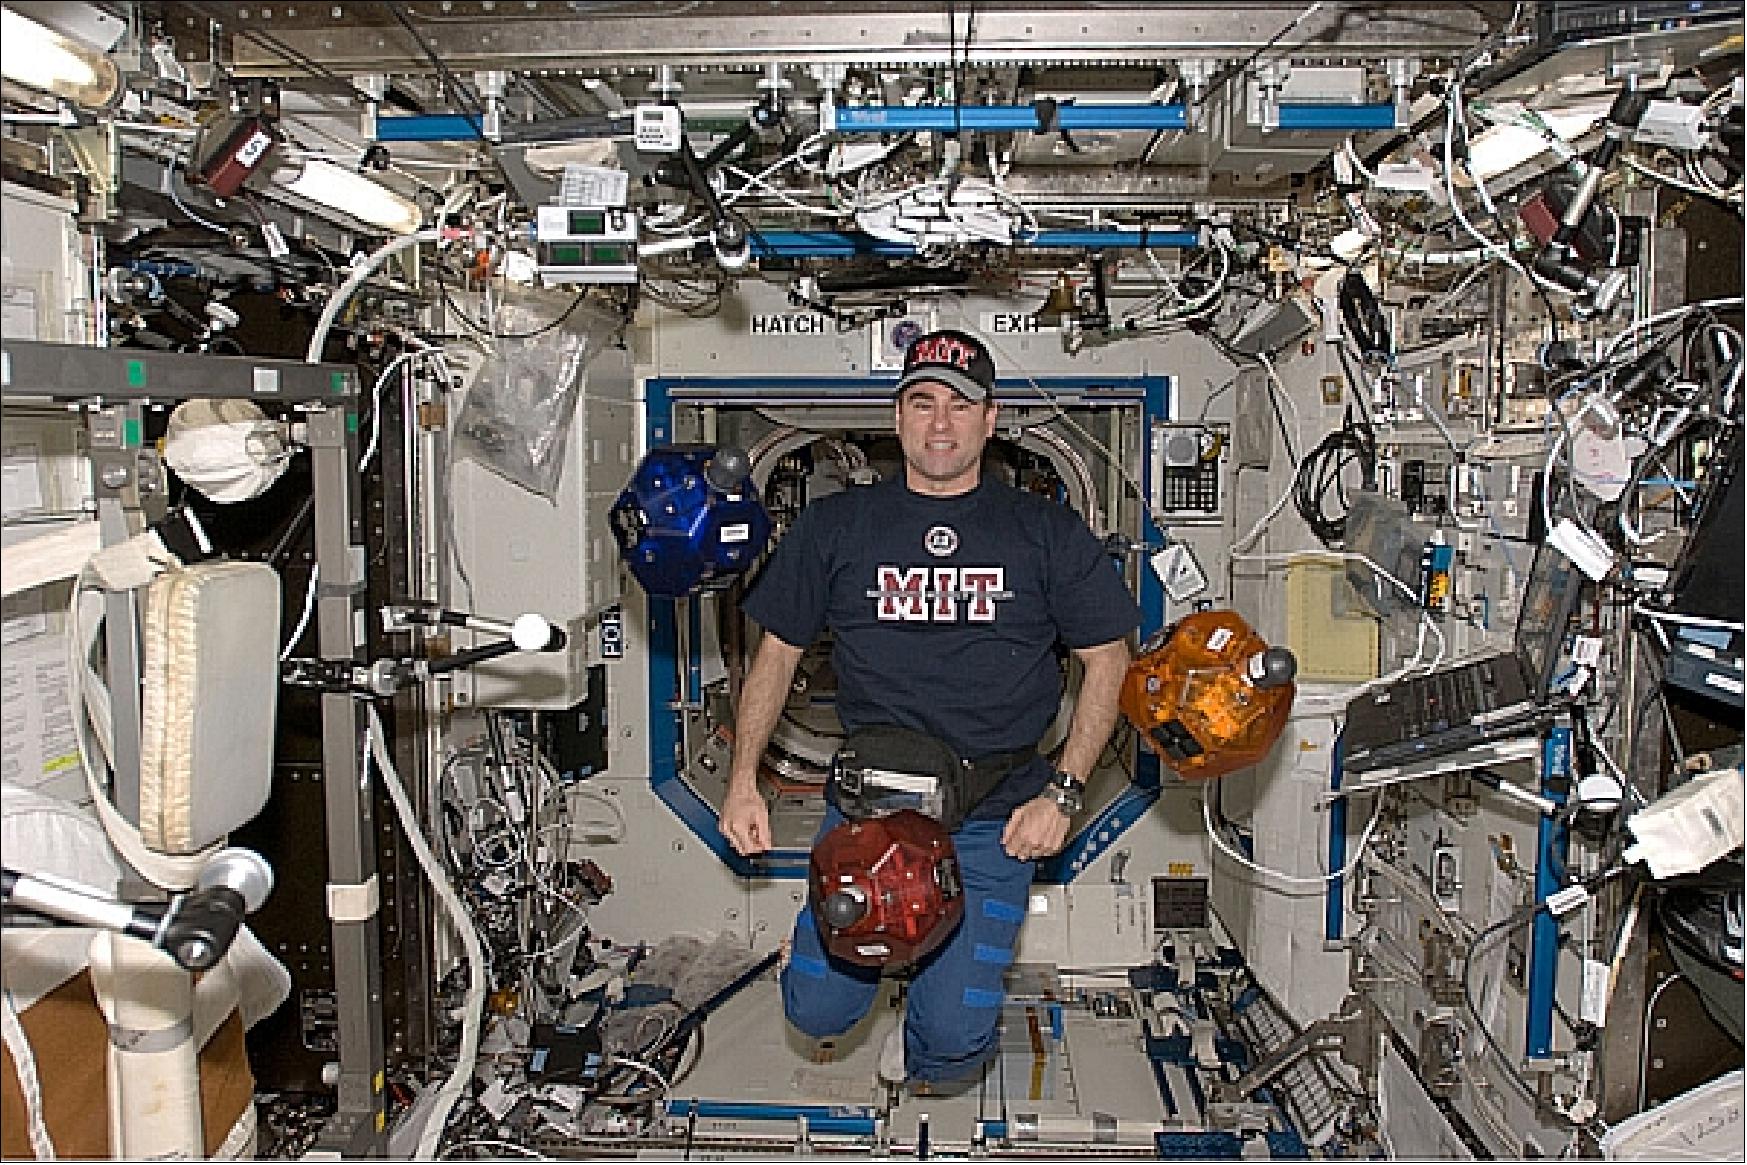 Figure 34: Astronaut Gregory Chamitoff, an MIT alumnus, is attending a SPHERES formation flight test (image credit: MIT)